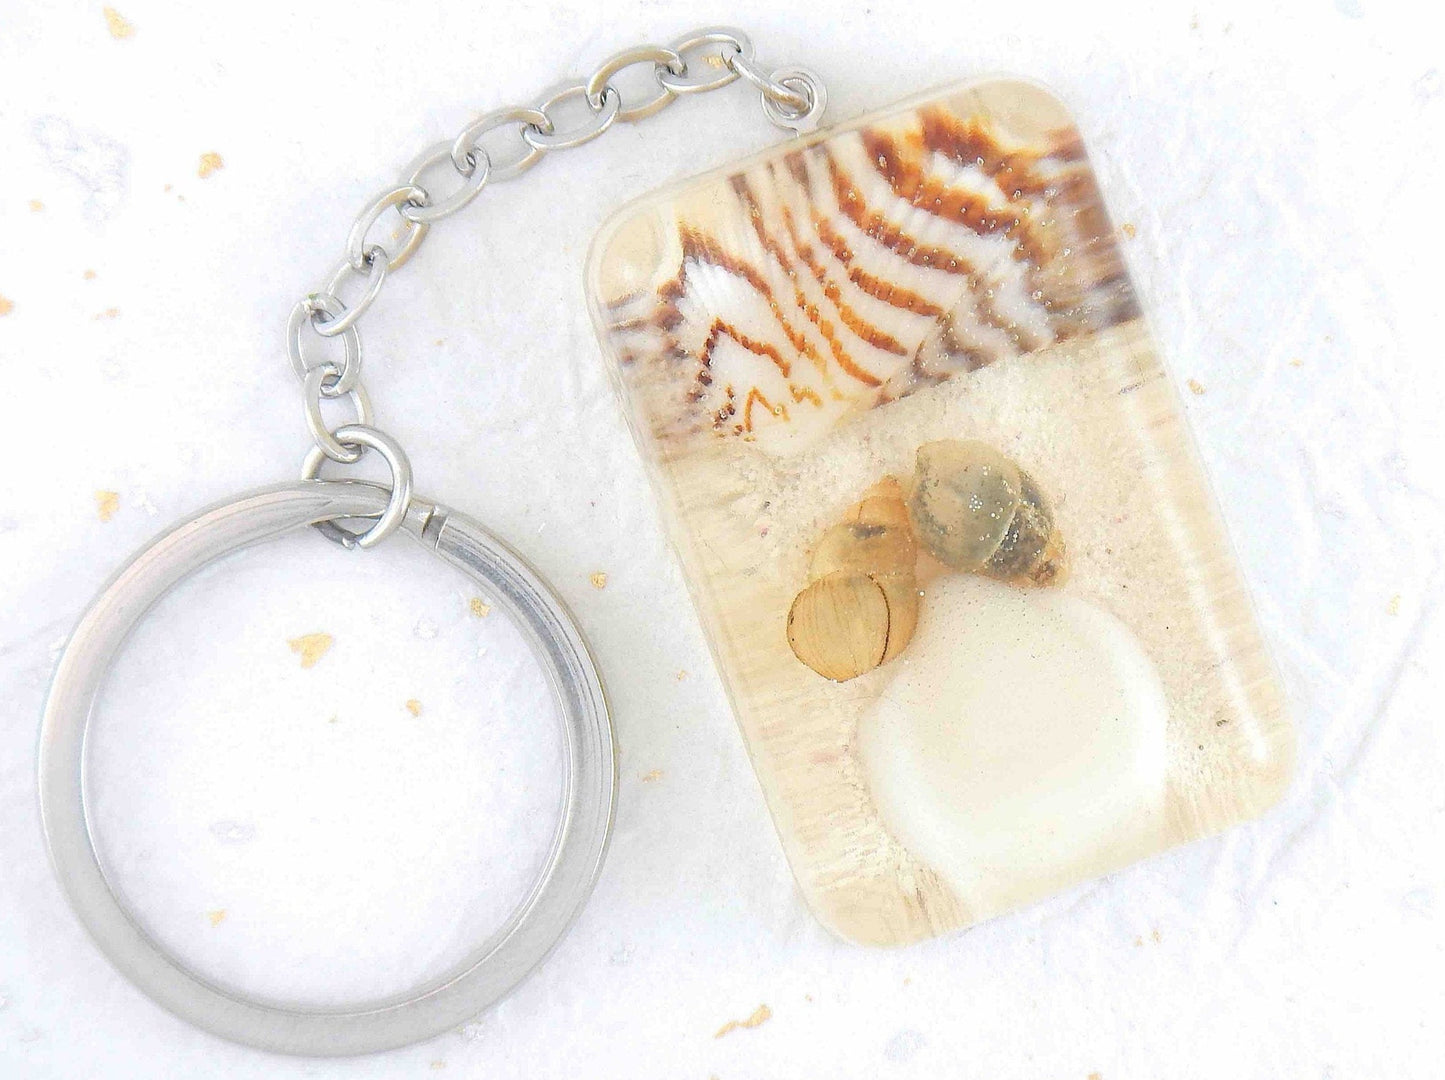 Keychain with handmade resin rectangle, white beach sand, brown and white striped shells, stainless steel chain